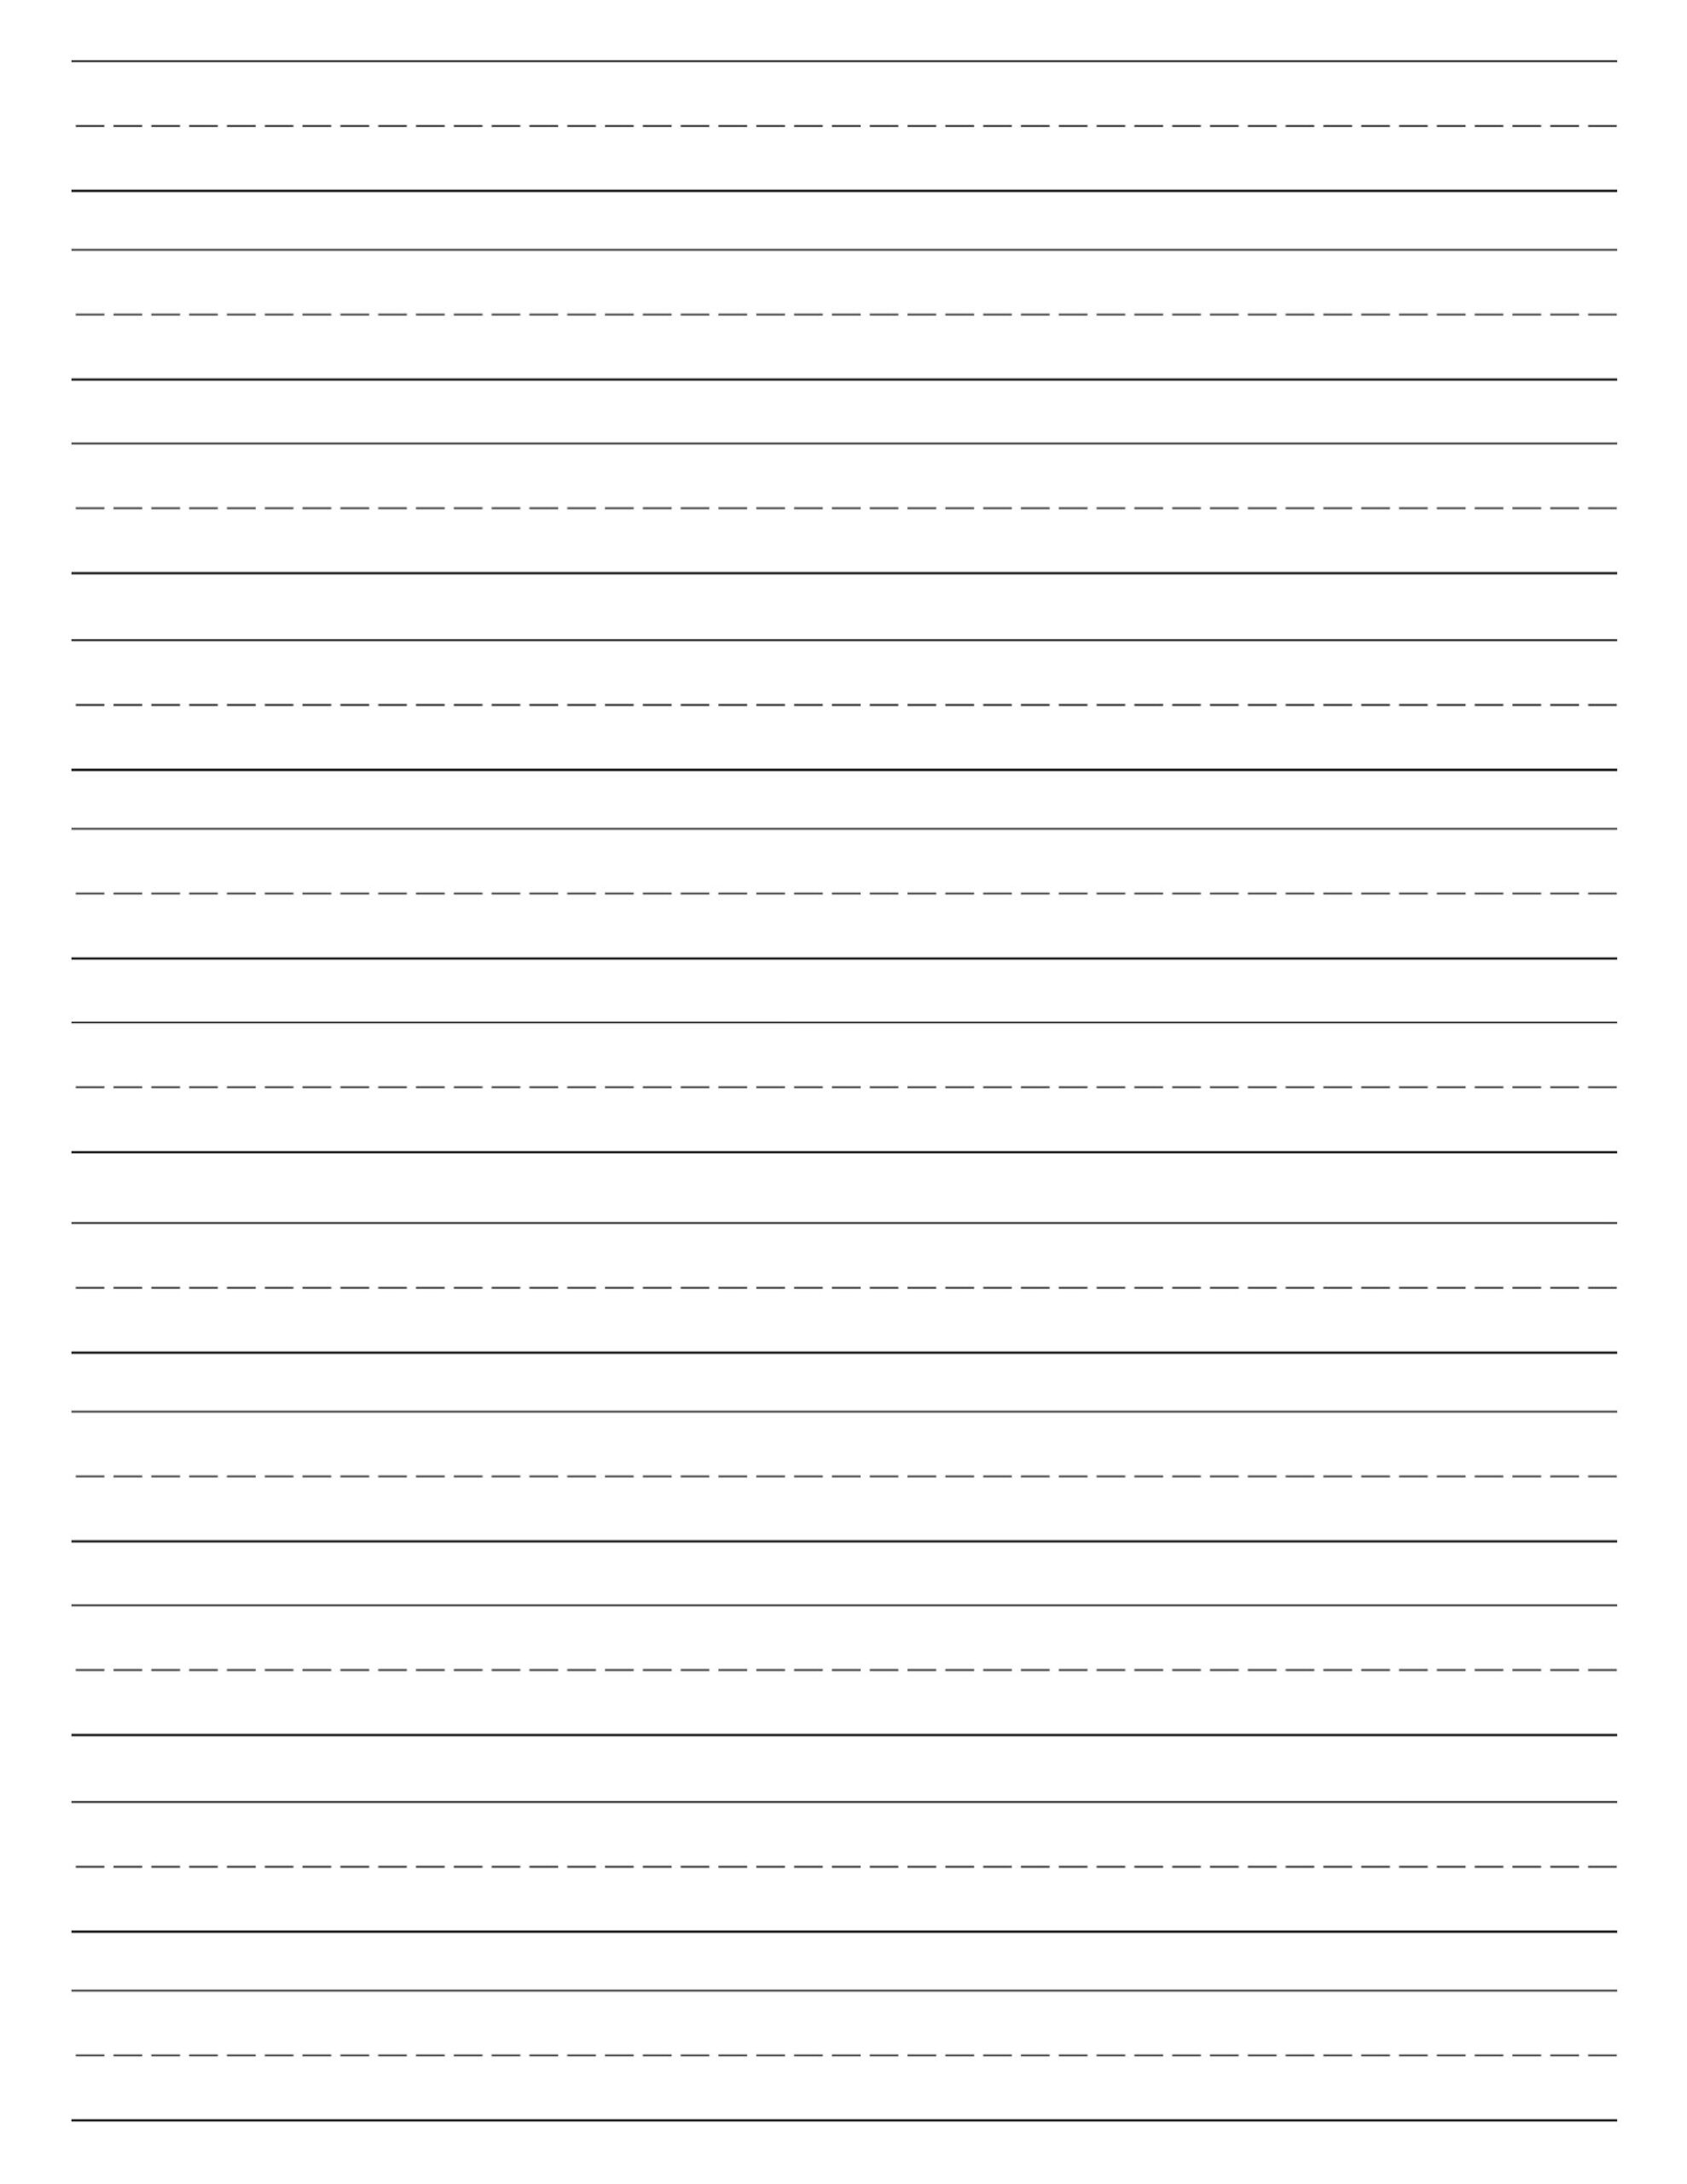 Print Lined Paper For Writing